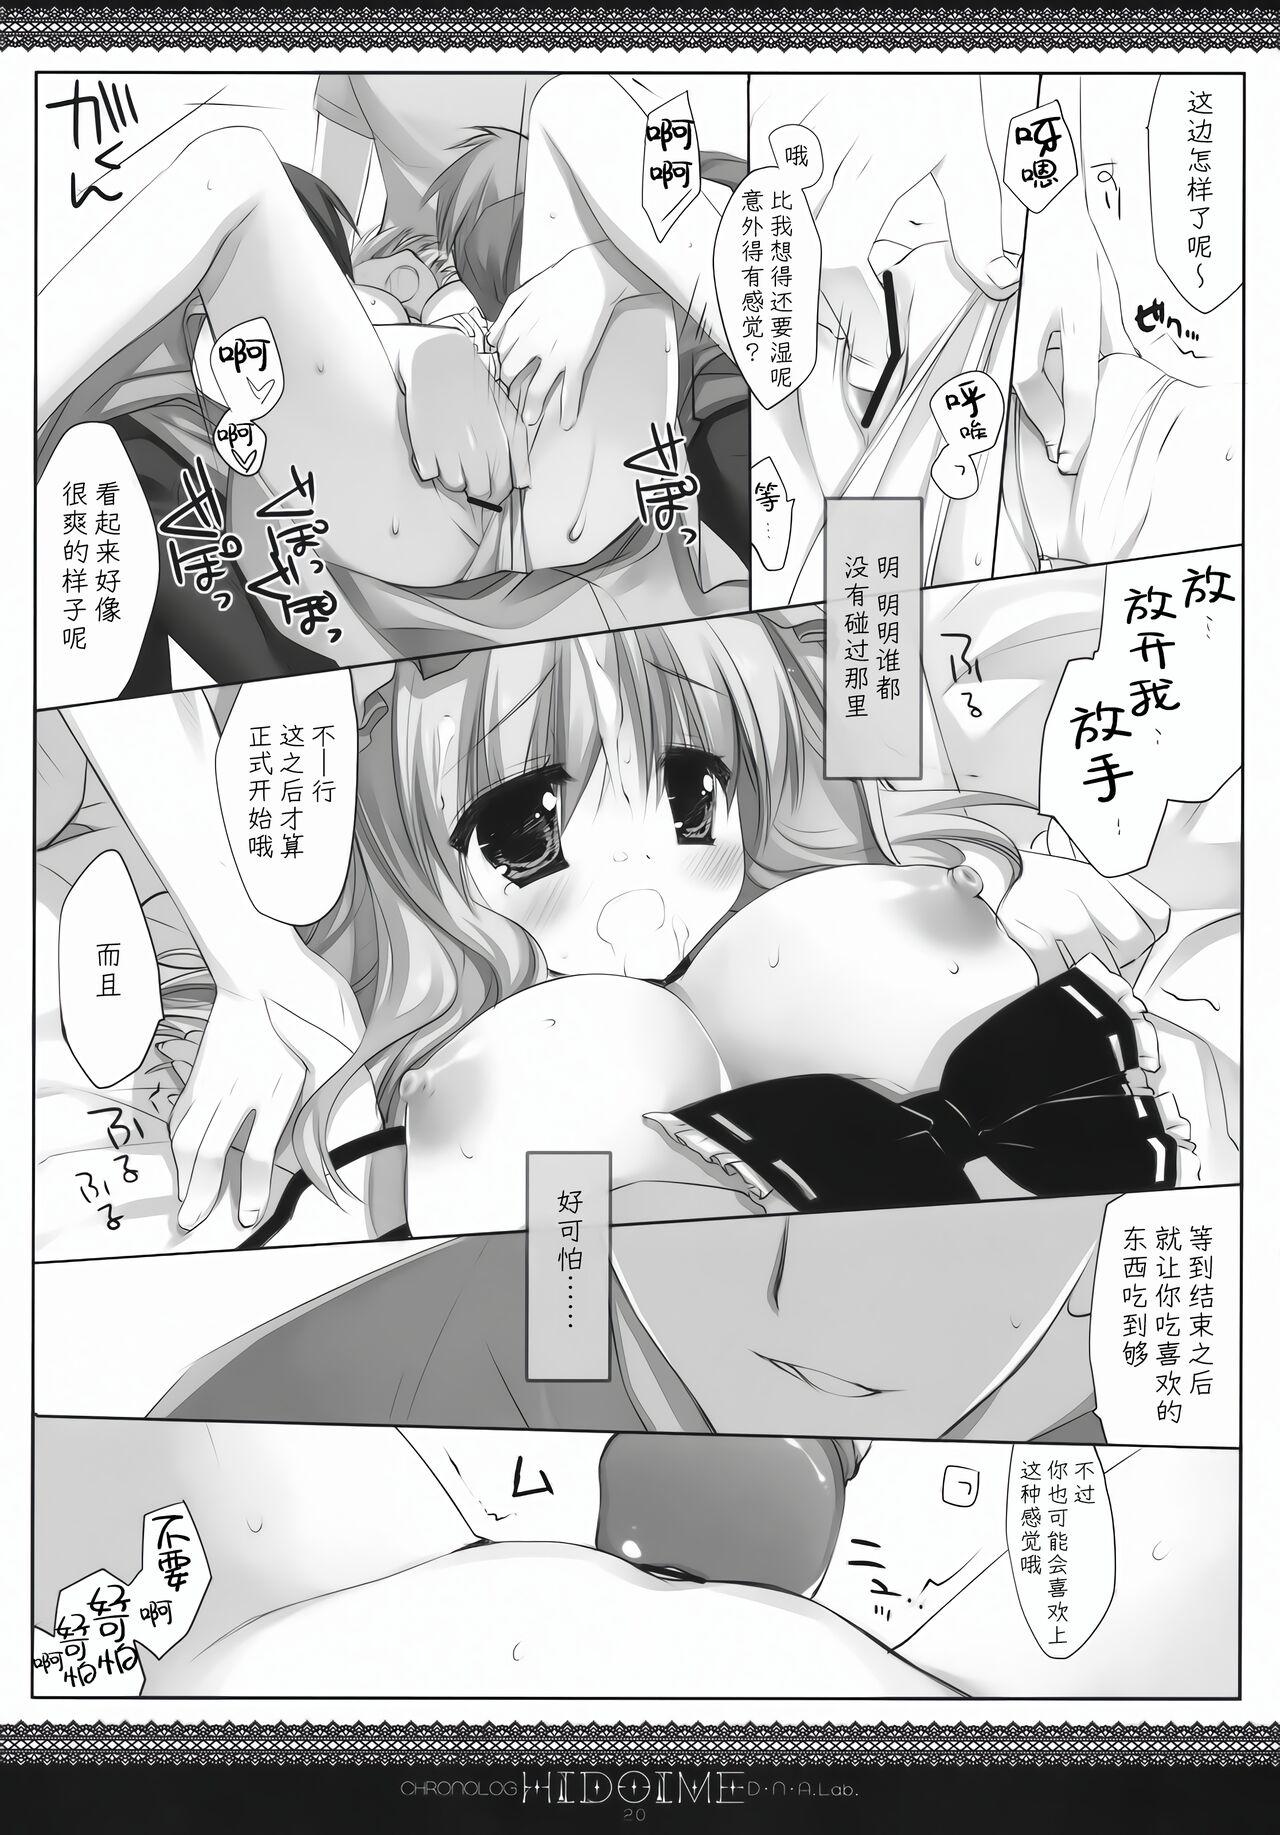 Full HIDOIME - Touhou project Joven - Page 9